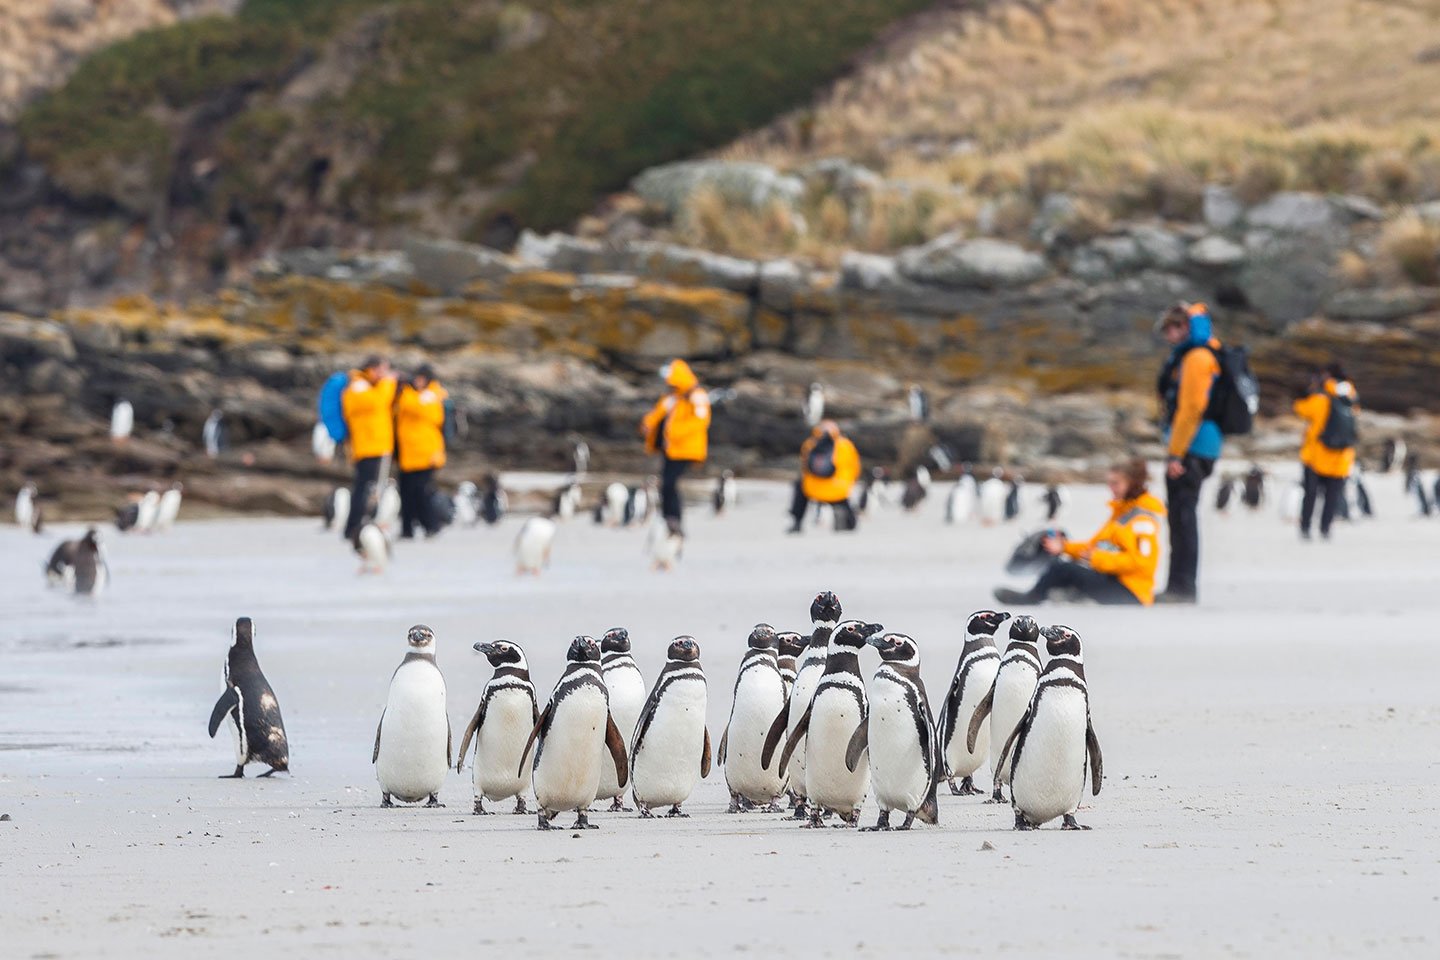 The pristine white beaches are surprising to some first-time visitors to the Falkland Islands.